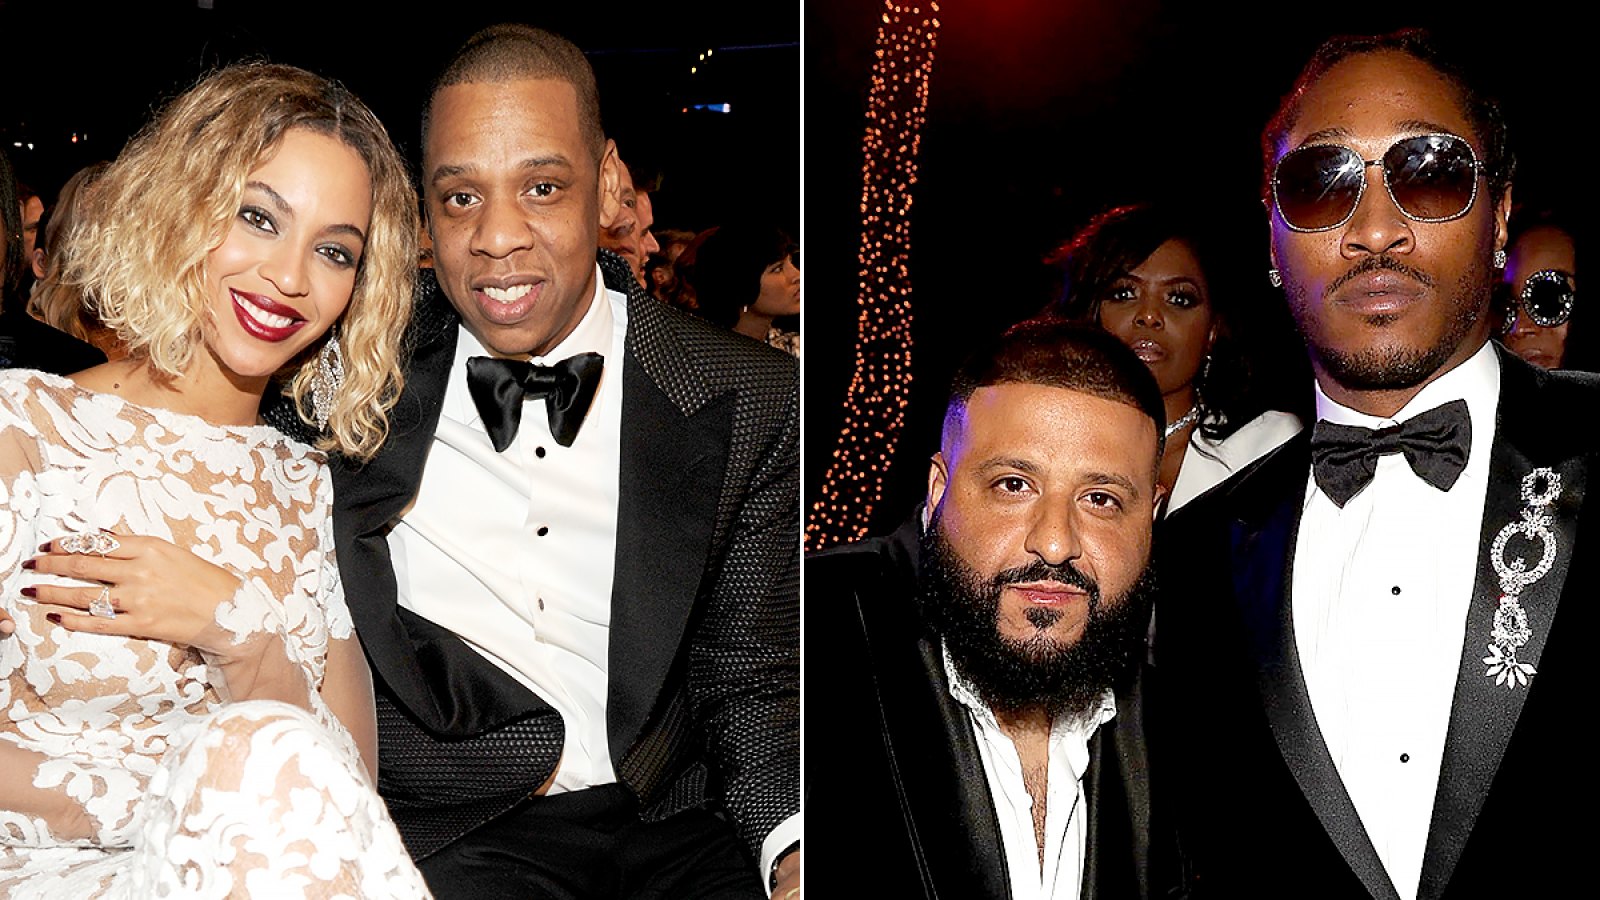 Beyonce-and-Jay-Z-Team-Up-With-DJ-Khaled-and-Future-on-New-Song